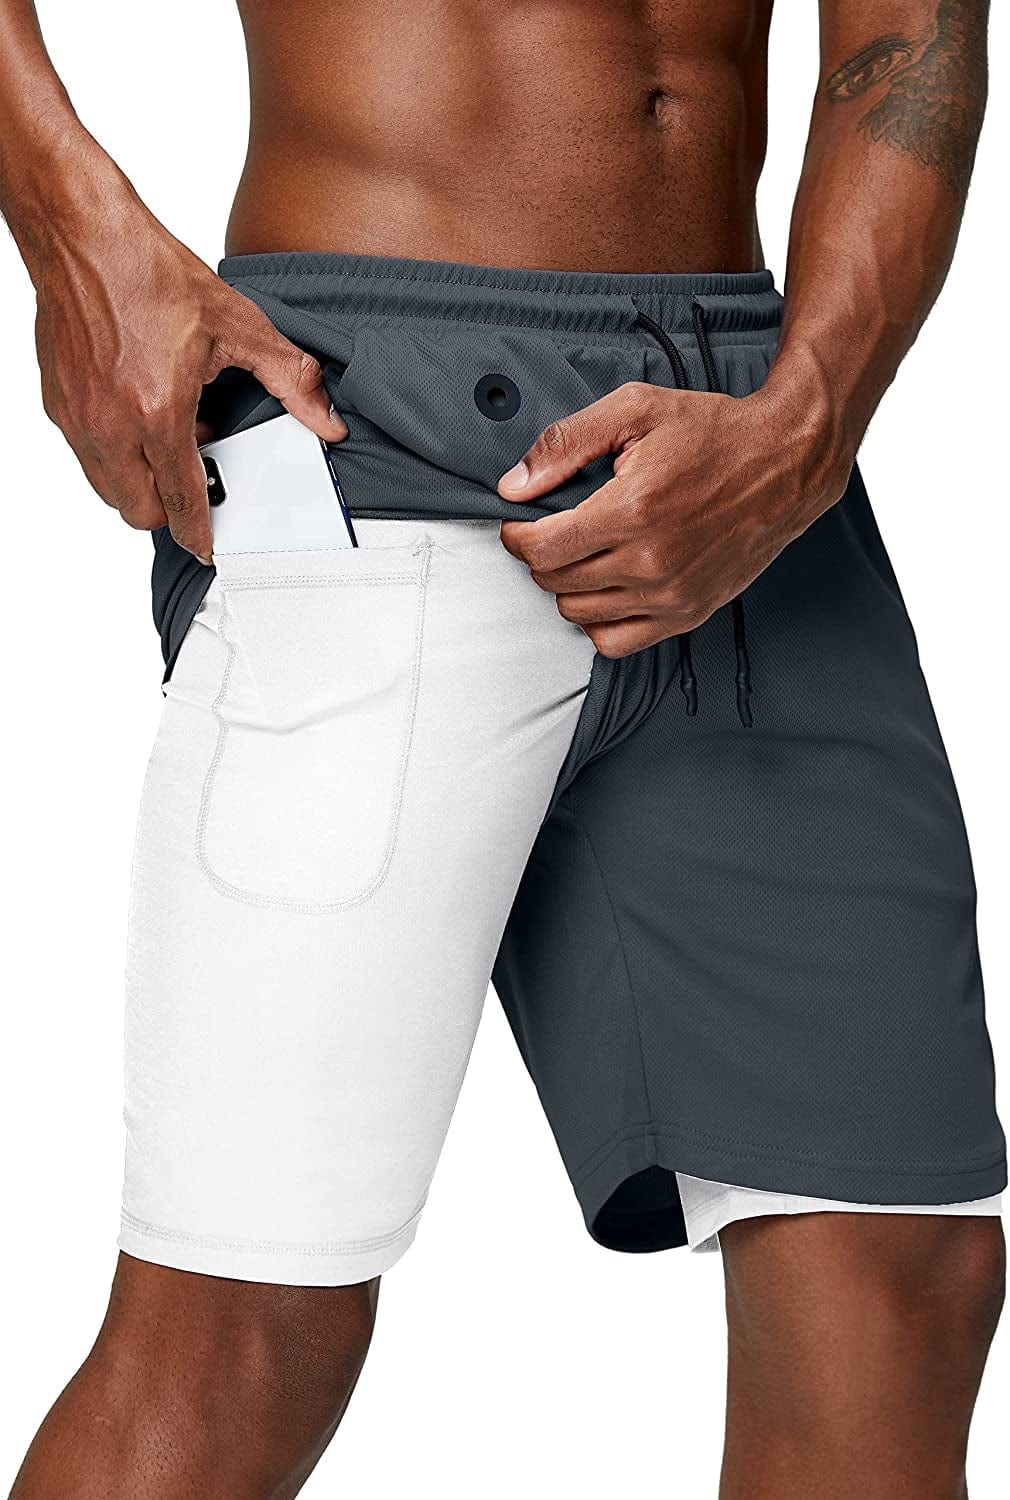 Pinkbomb Men'S 2 in 1 Running Shorts Gym Workout Quick Dry Mens Shorts with Phone Pocket